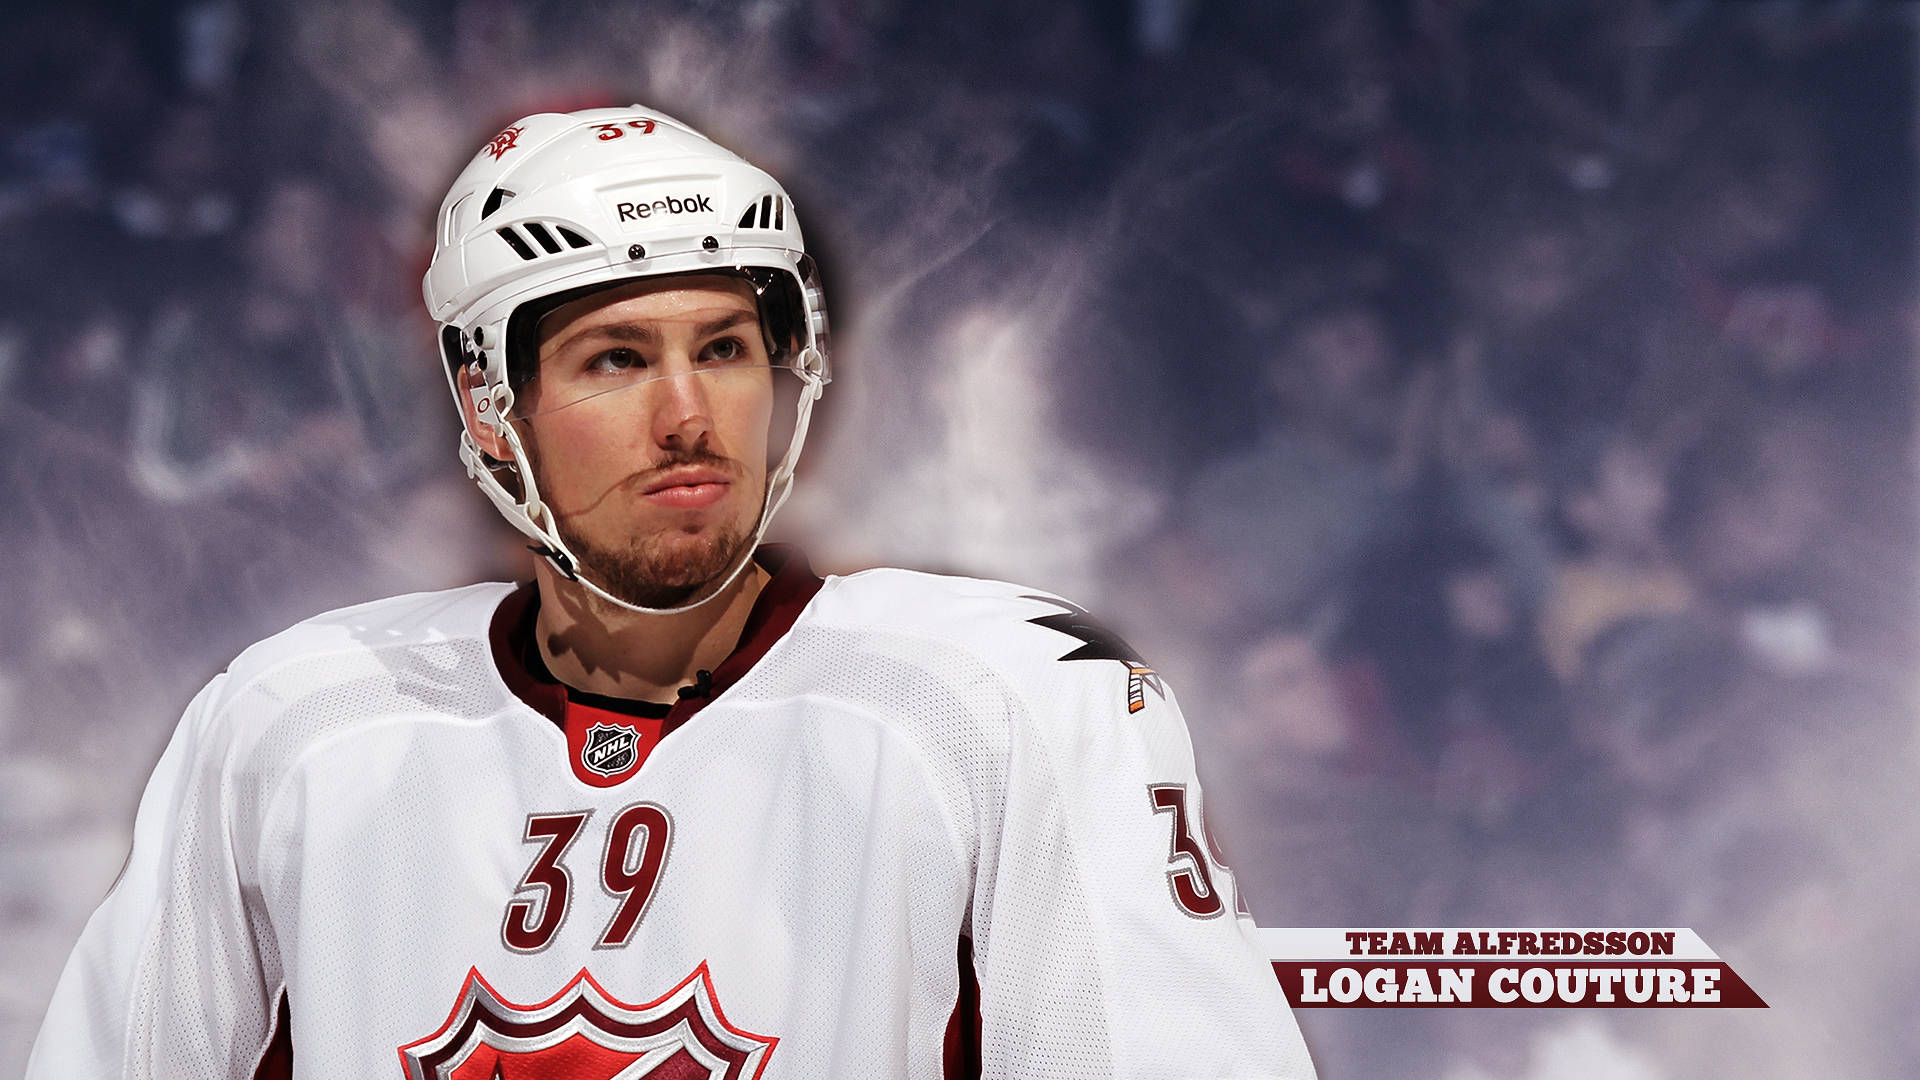 Ice Hockey Player Logan Couture Team Alfredsson Wallpaper